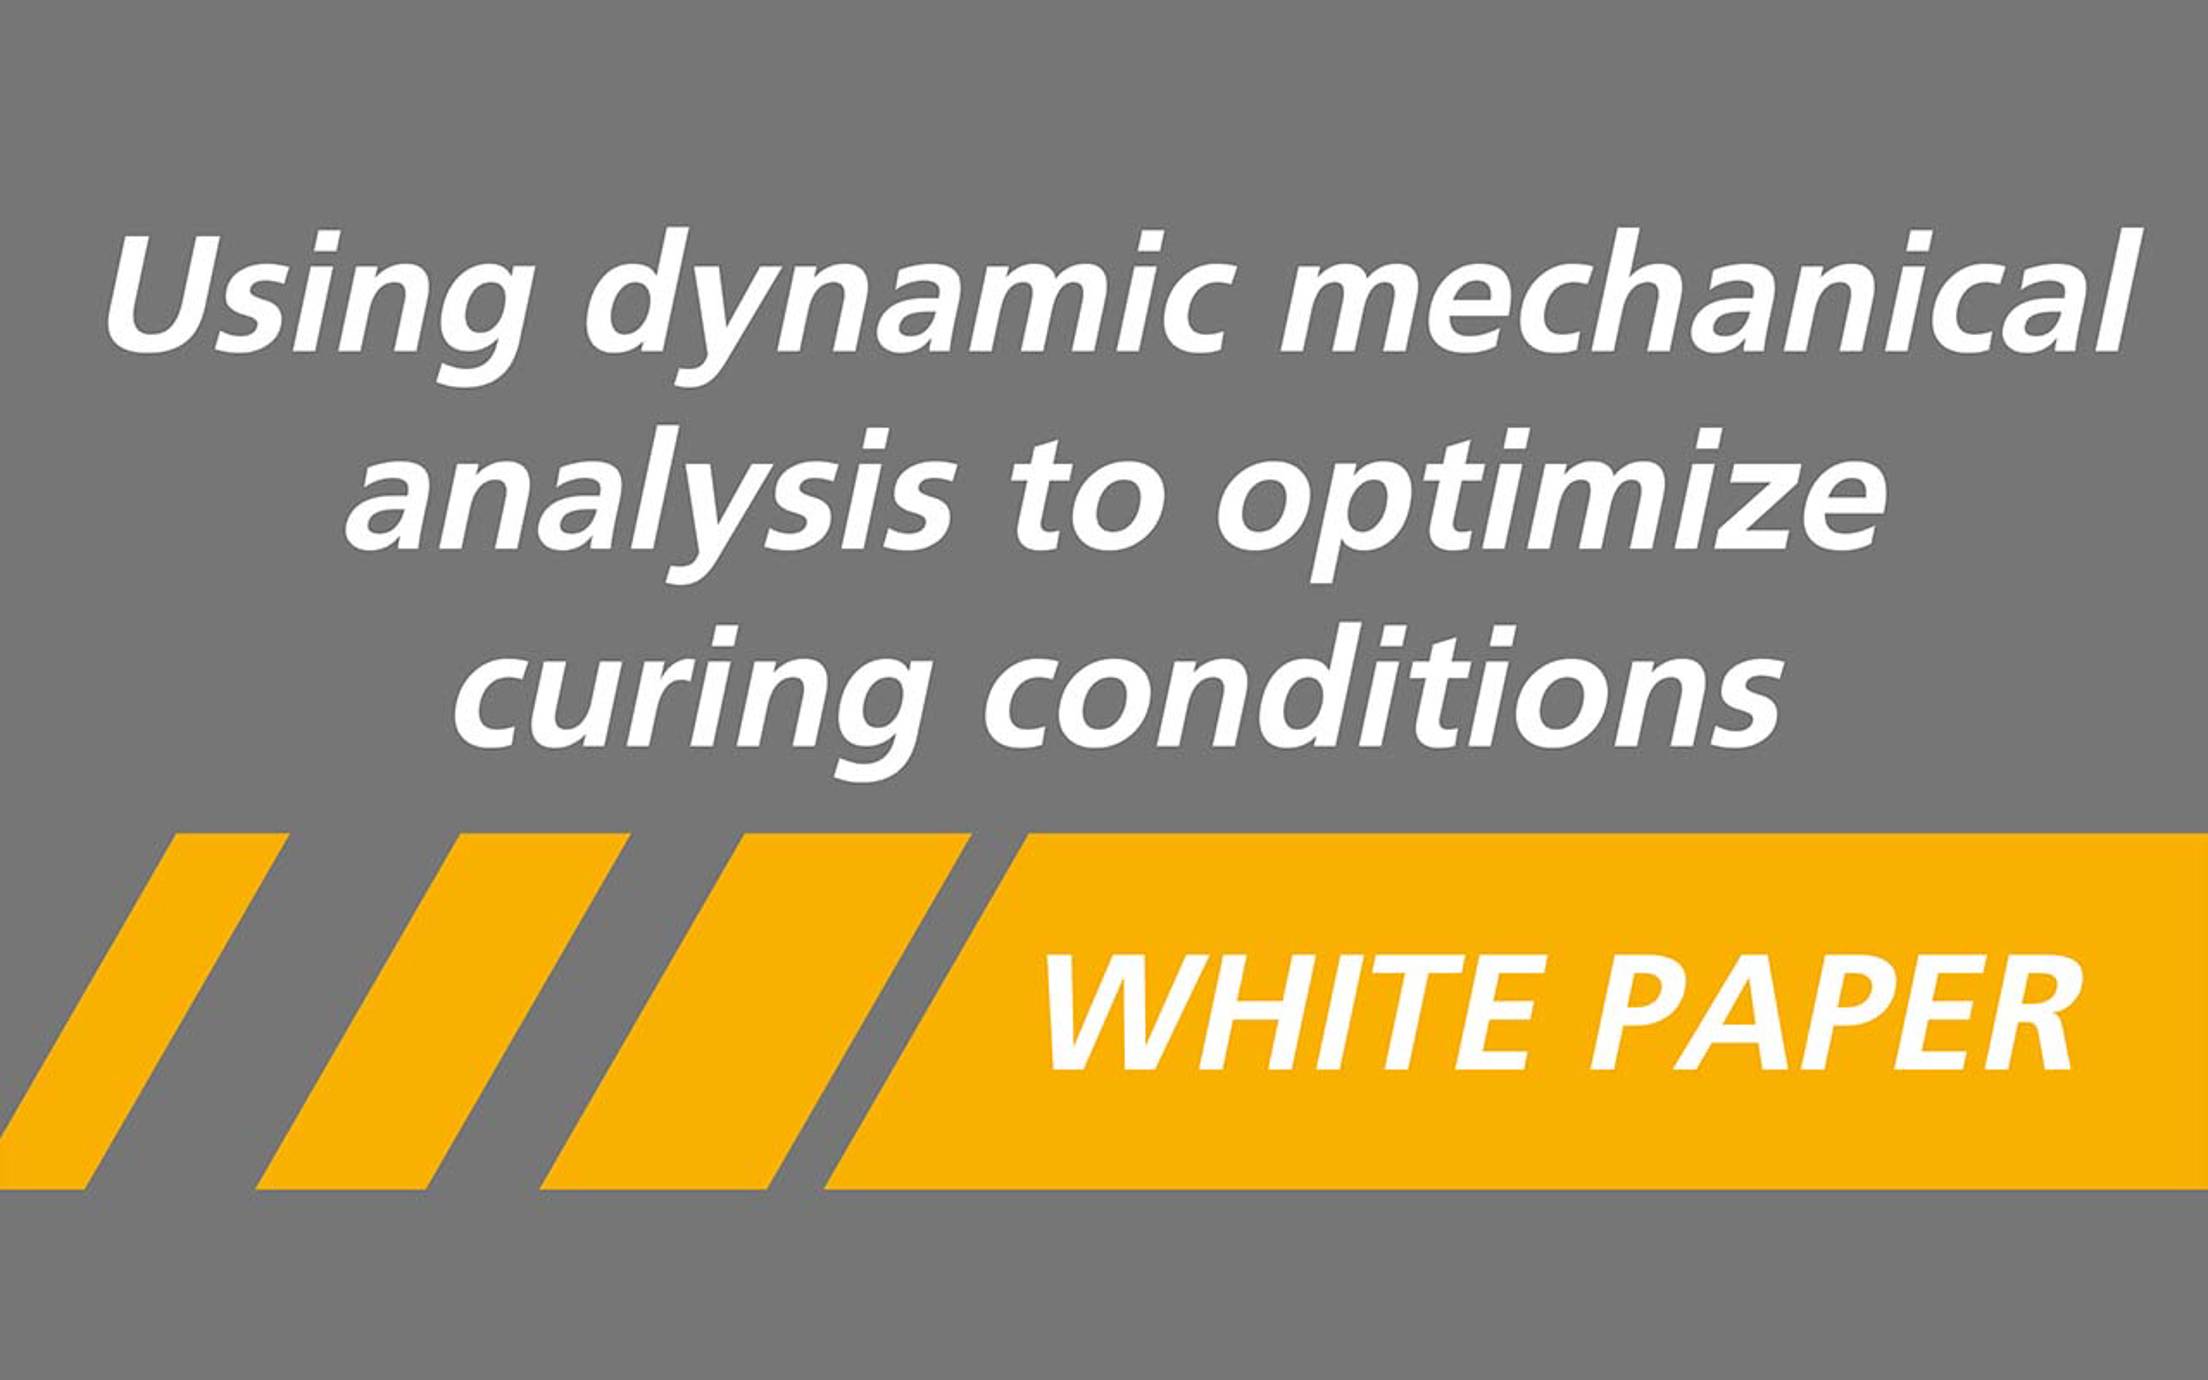 Image showing title of Jotun's white paper called Using dynamic mechanical analysis to optimise curing conditions